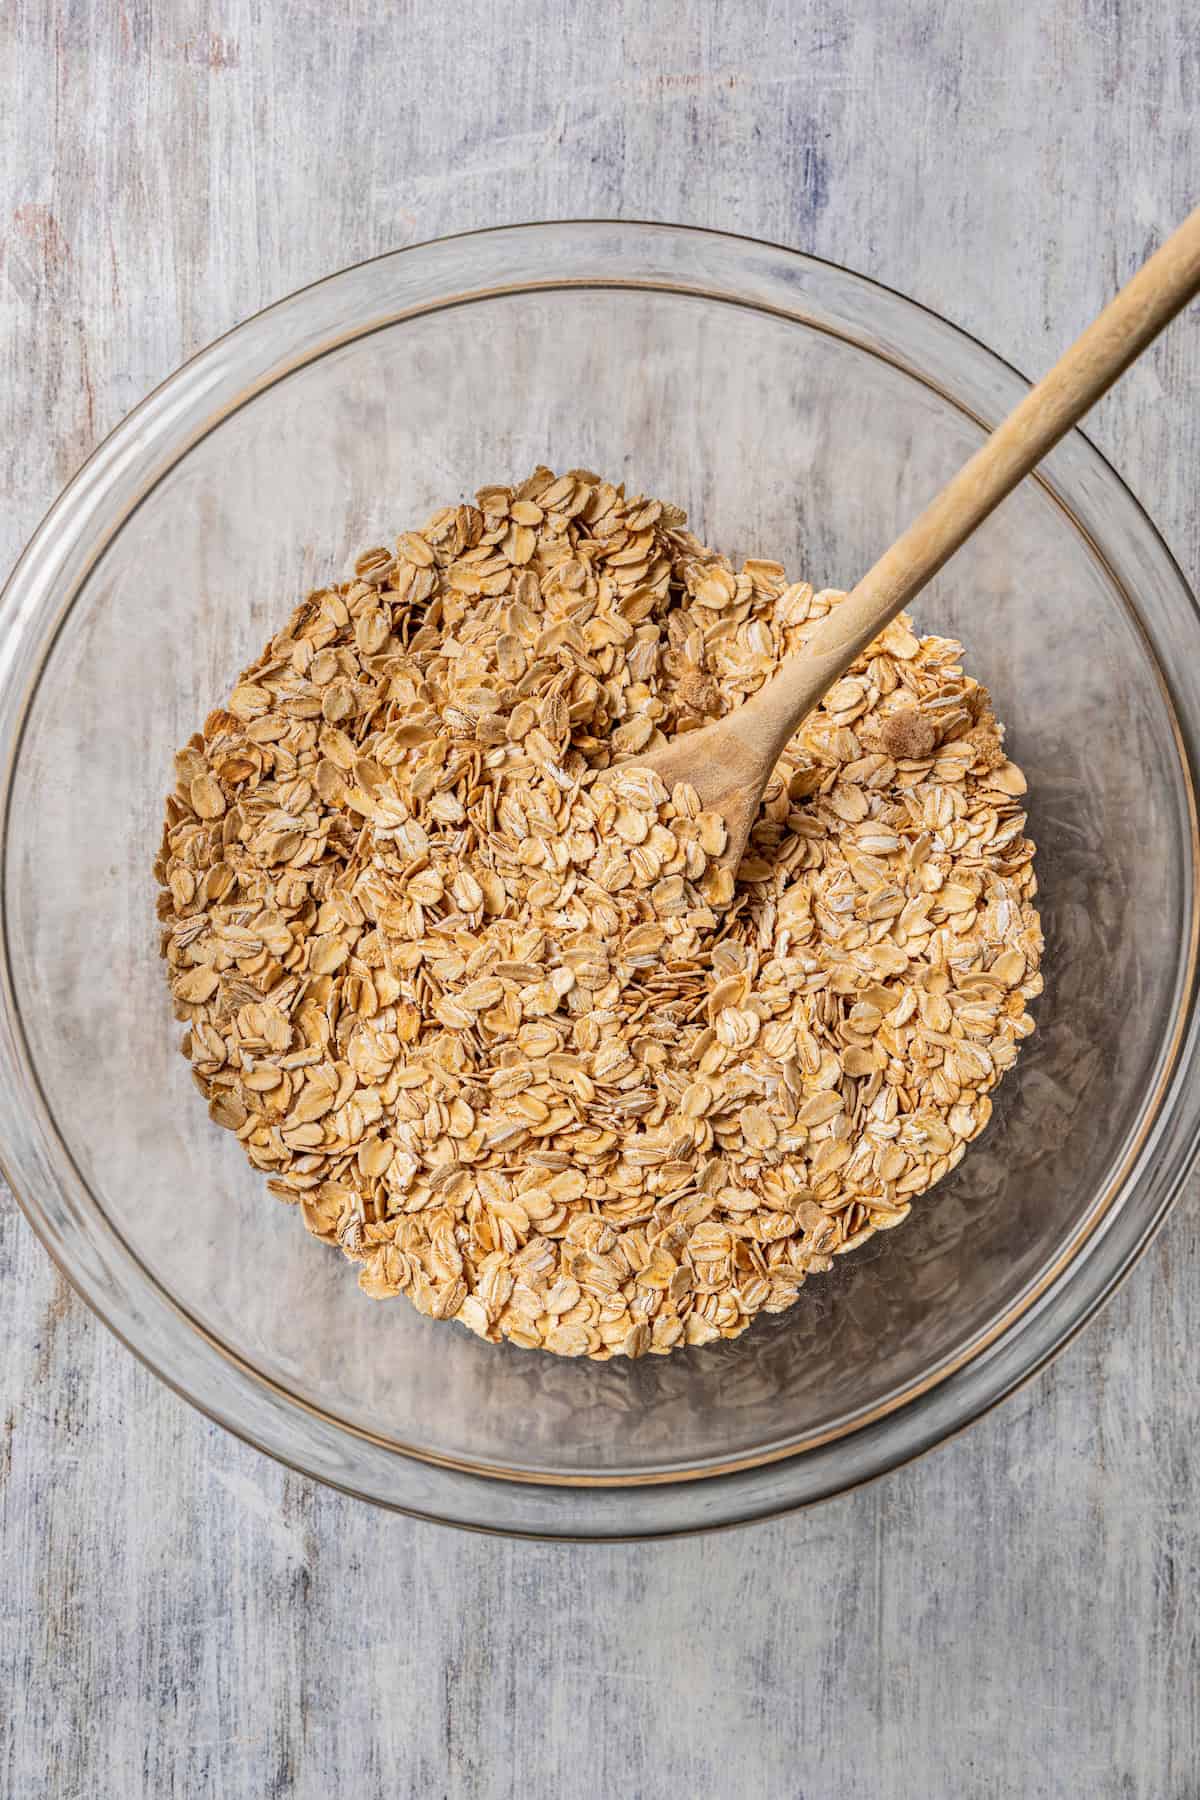 Oats and dry ingredients combined in a glass bowl with a wooden spoon.